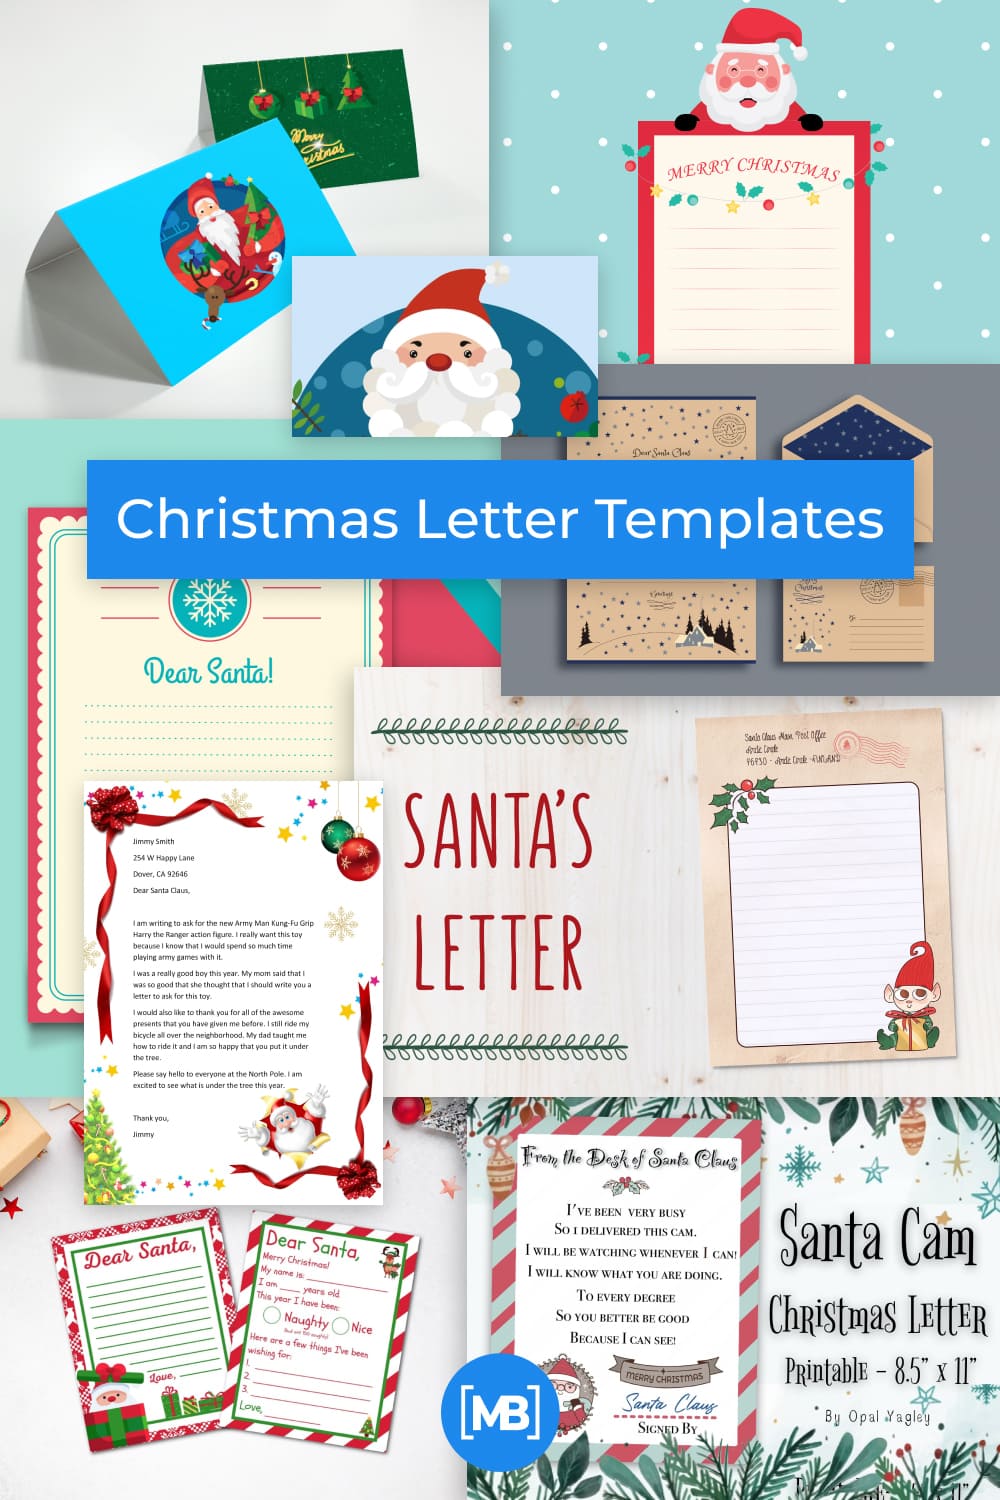 10+ Best Christmas Letter Templates . Best Free and Premium Templates